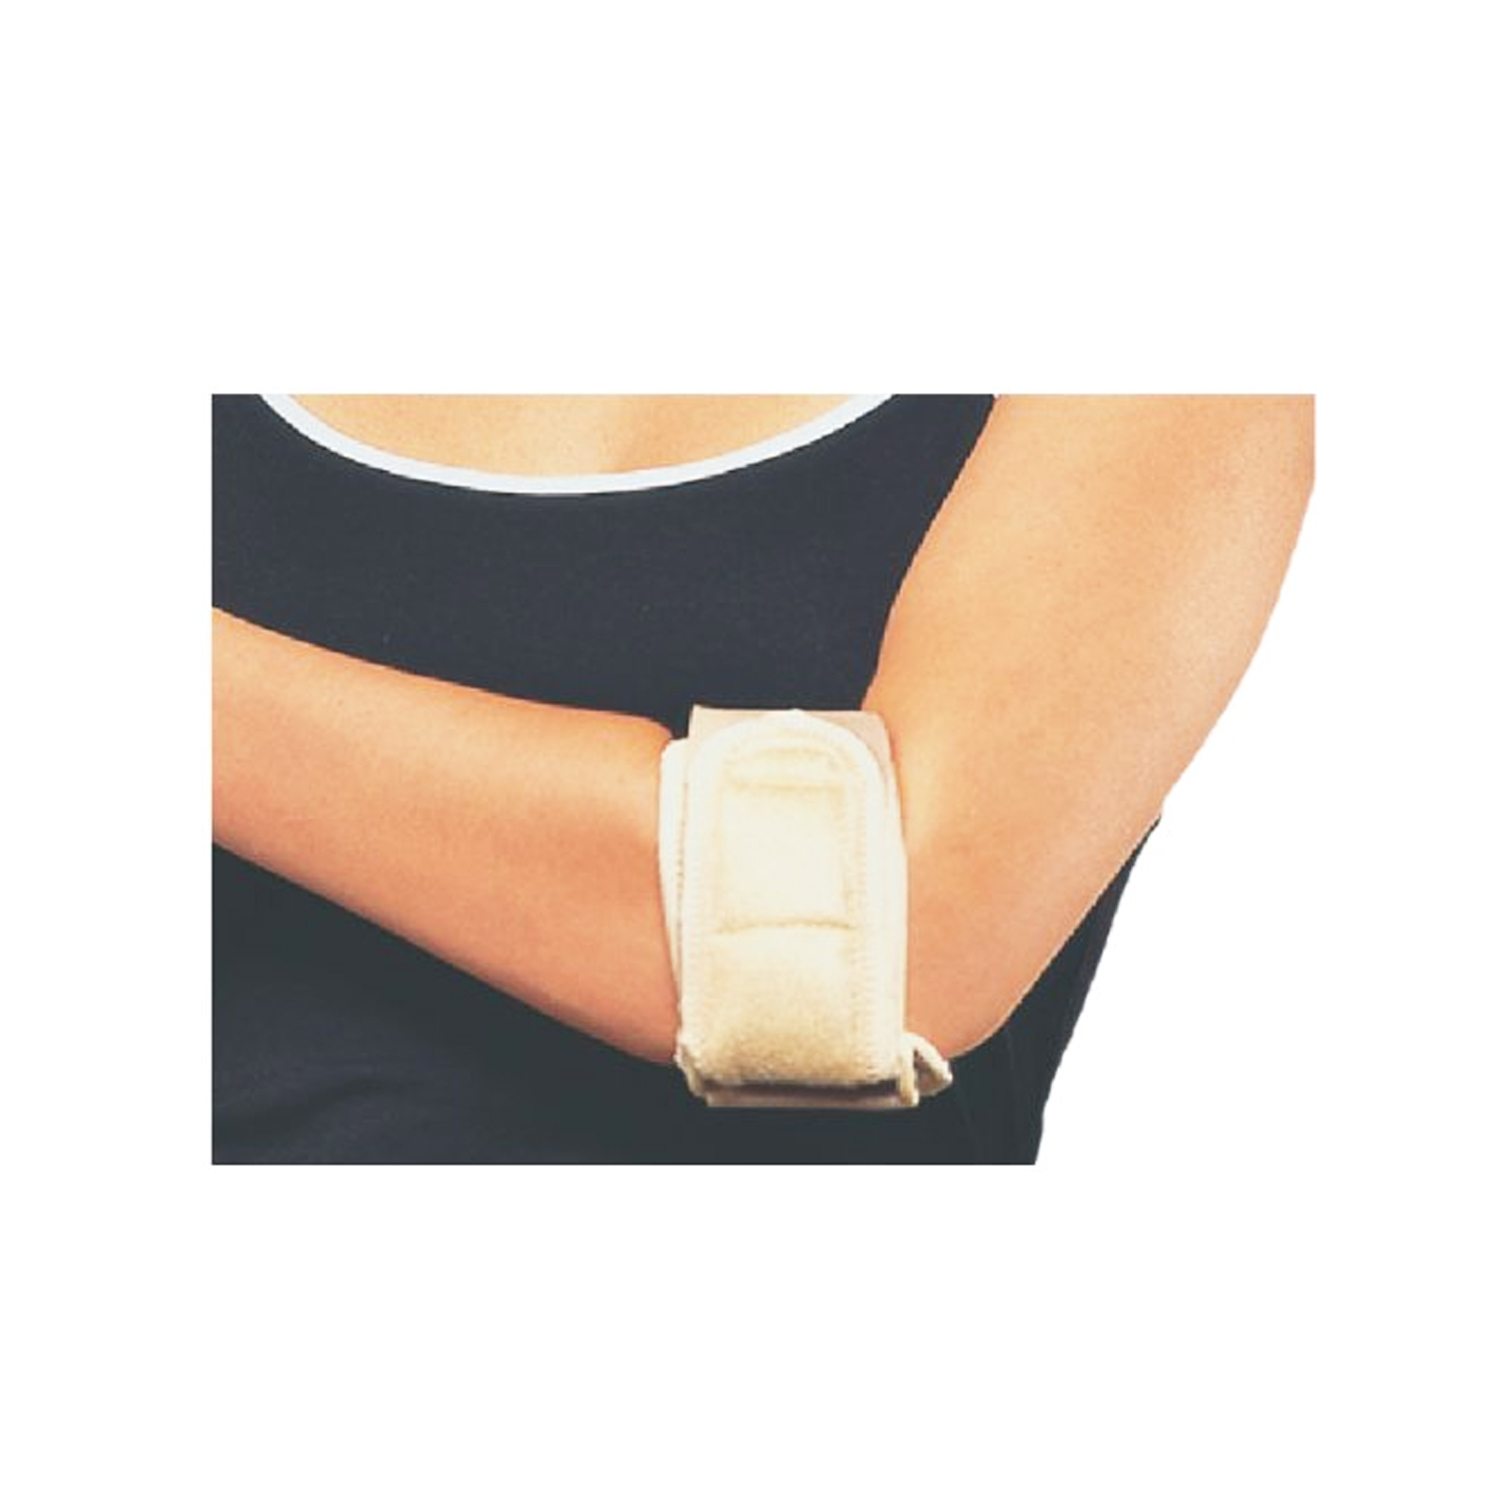 Buy Flamingo Tennis Elbow support XL ₹230 best offer price online from cureka